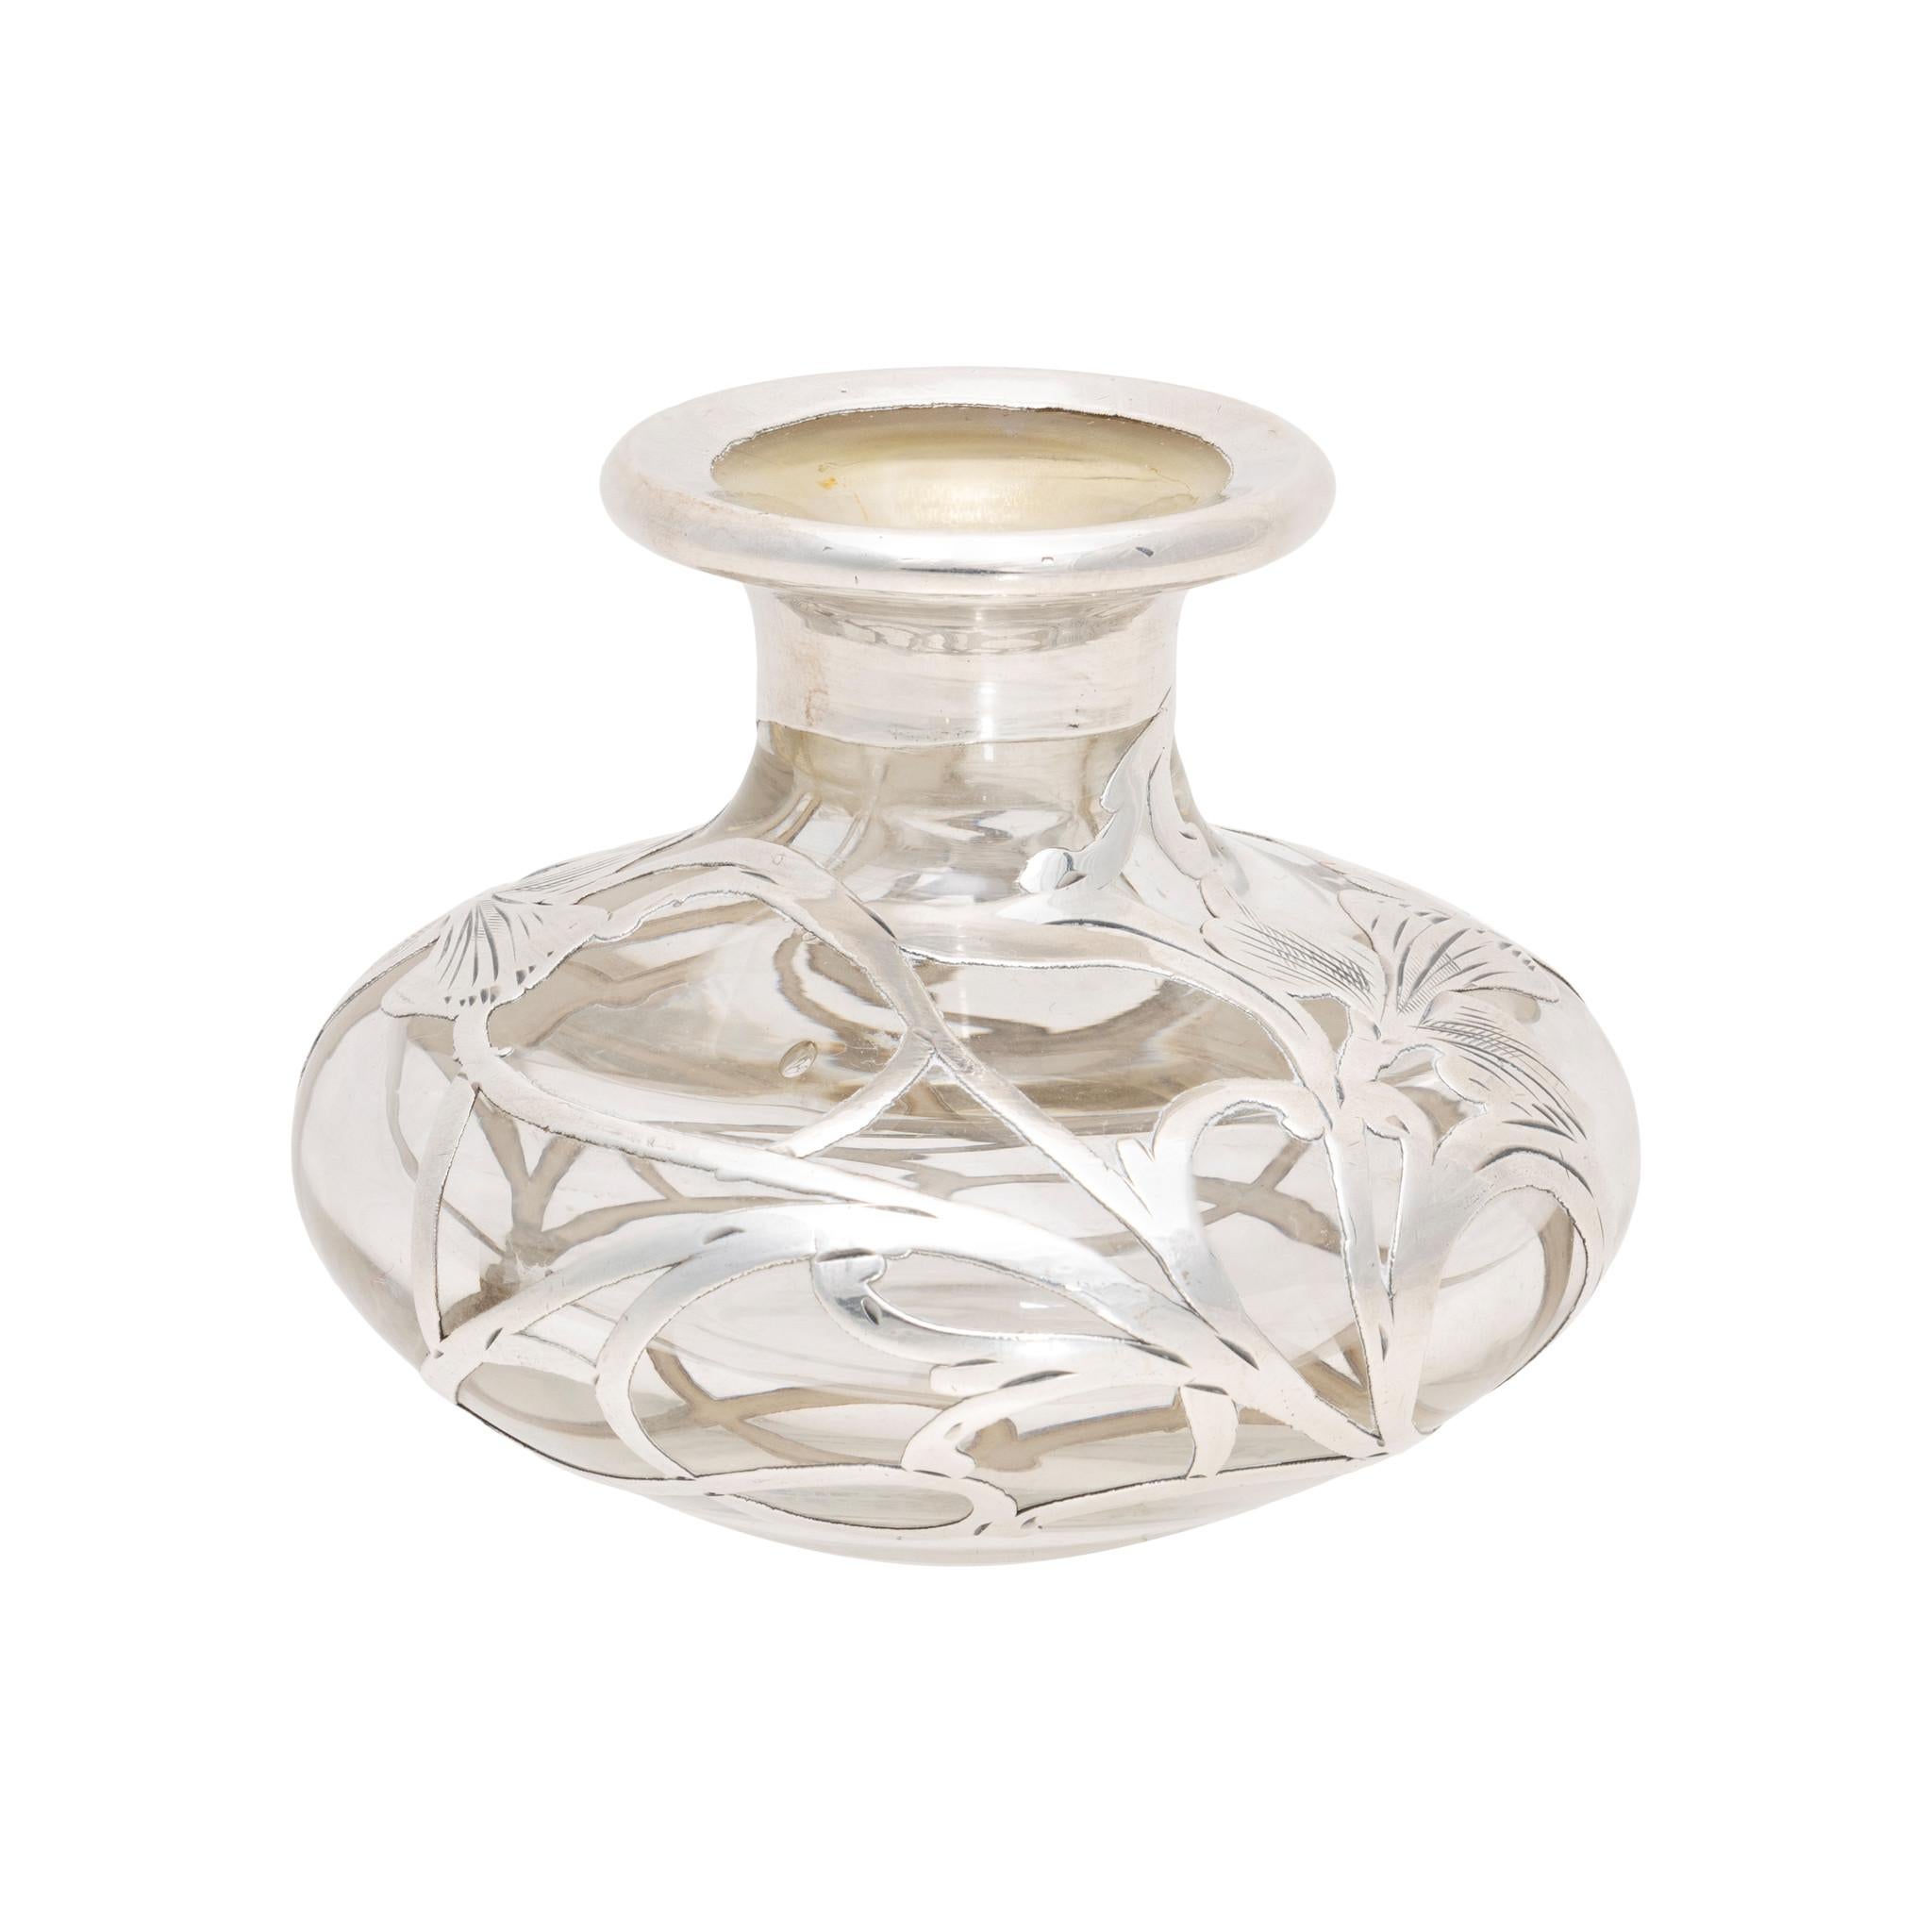 Alvin silver overlay glass perfume bottle. With clear glass and art nouveau style silverwork, featuring two irises. Center is monogrammed with a gothic style 